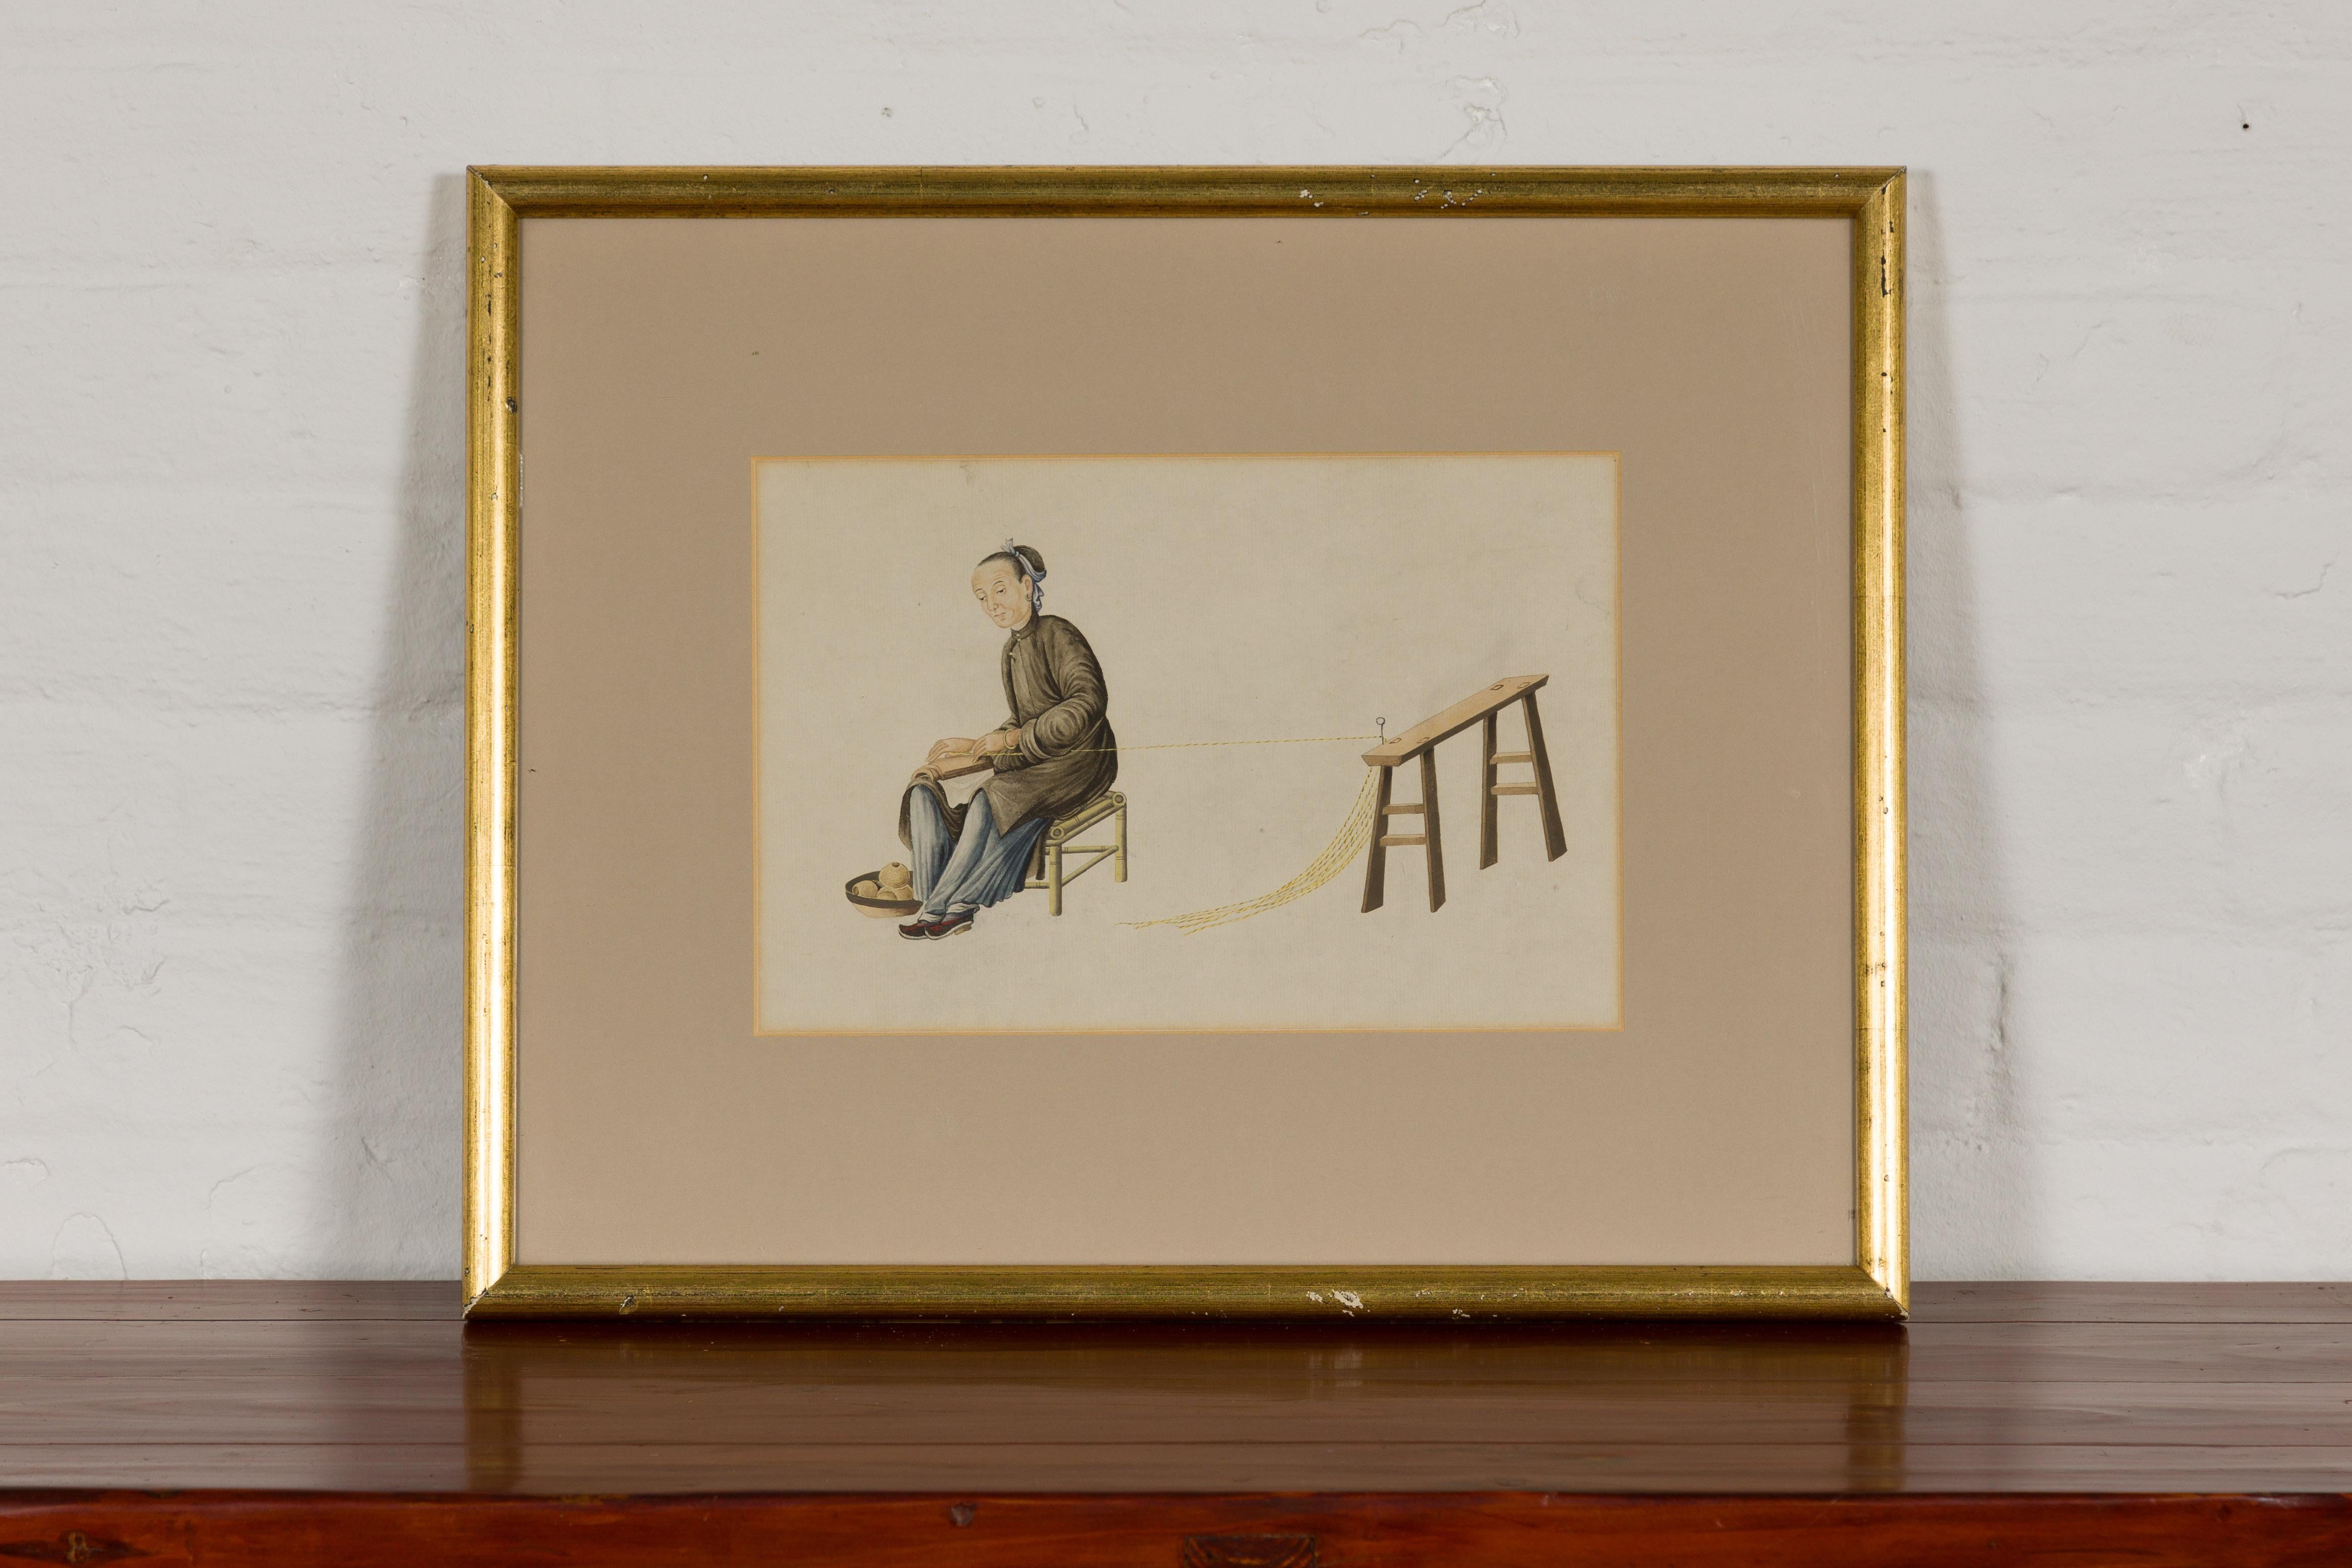 A 19th century Qing Dynasty period Chinese watercolor painting of a silk spinner in custom frame. Envelop your home with the essence of ancient Chinese culture and craftsmanship through this captivating 19th-century Chinese watercolor painting.